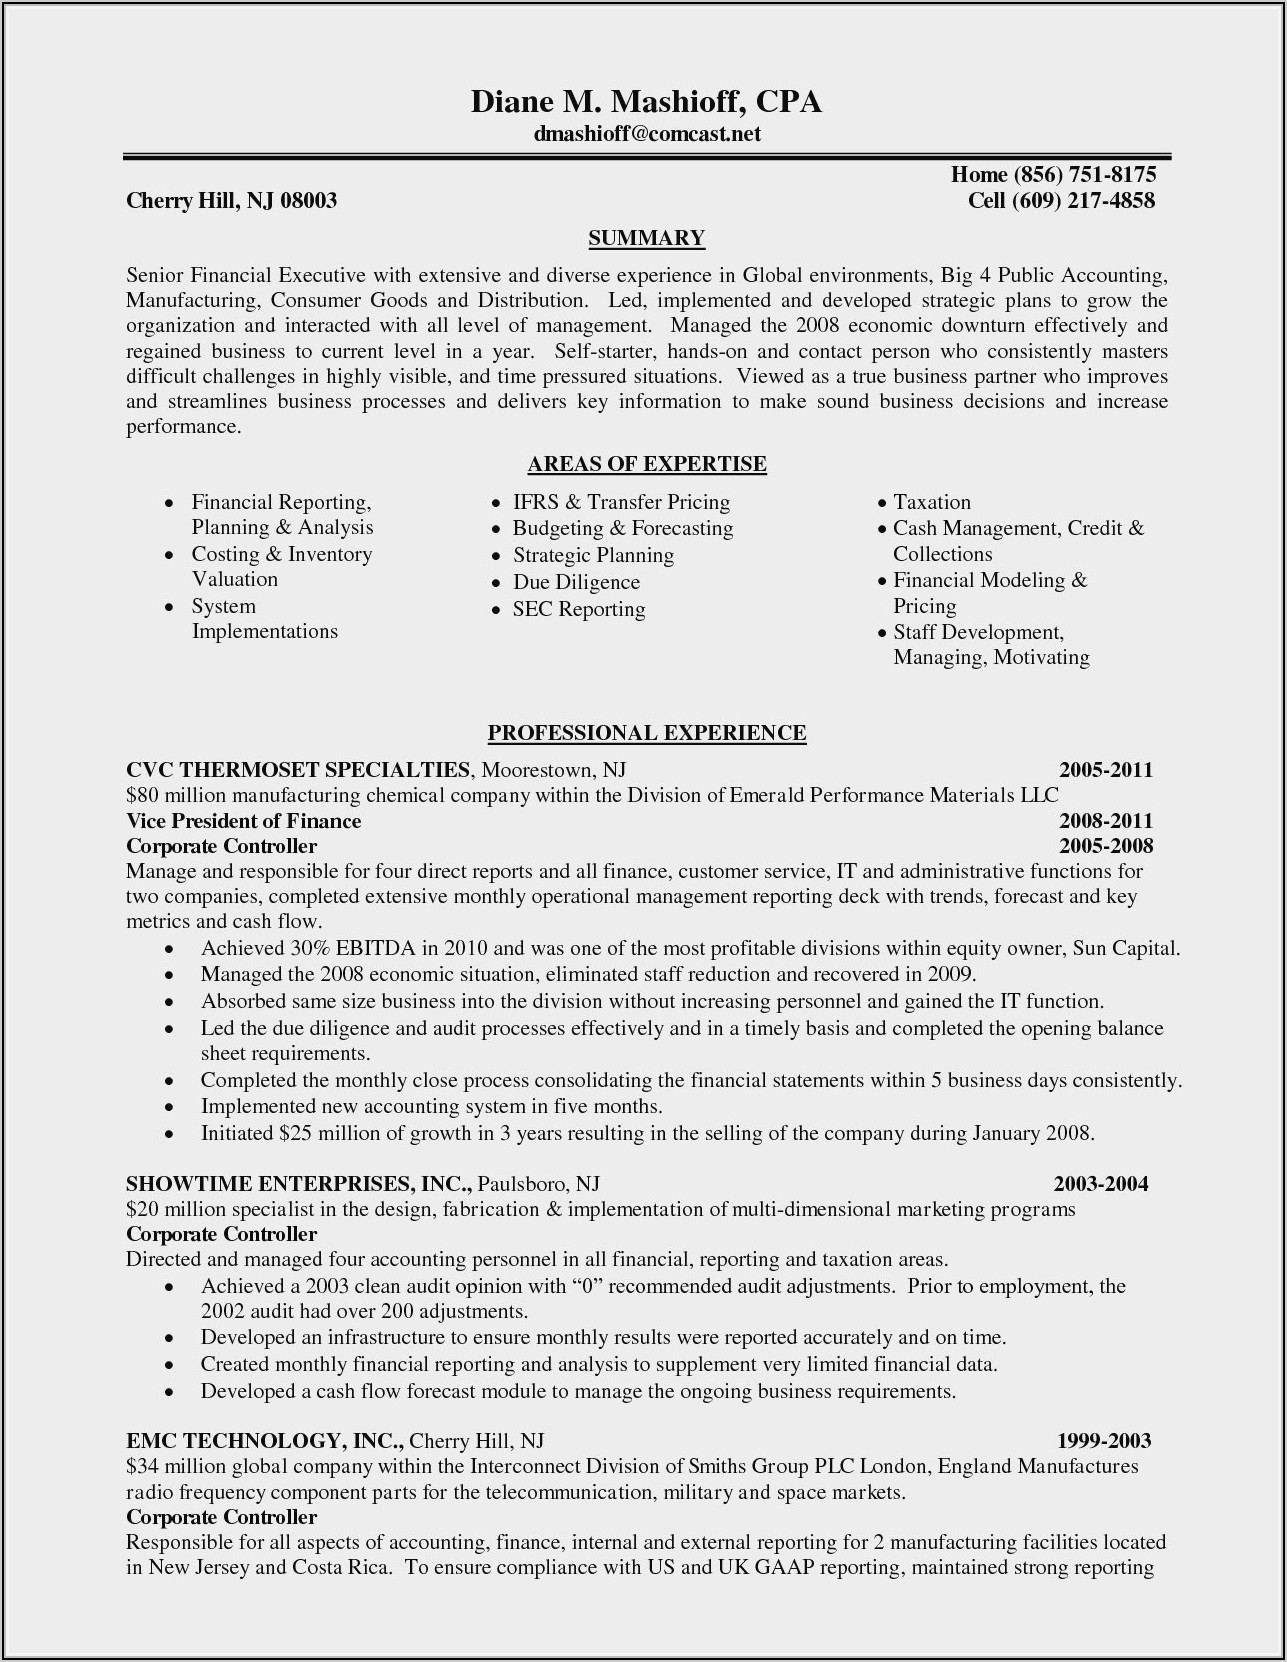 Resume Samples For Accountant In India